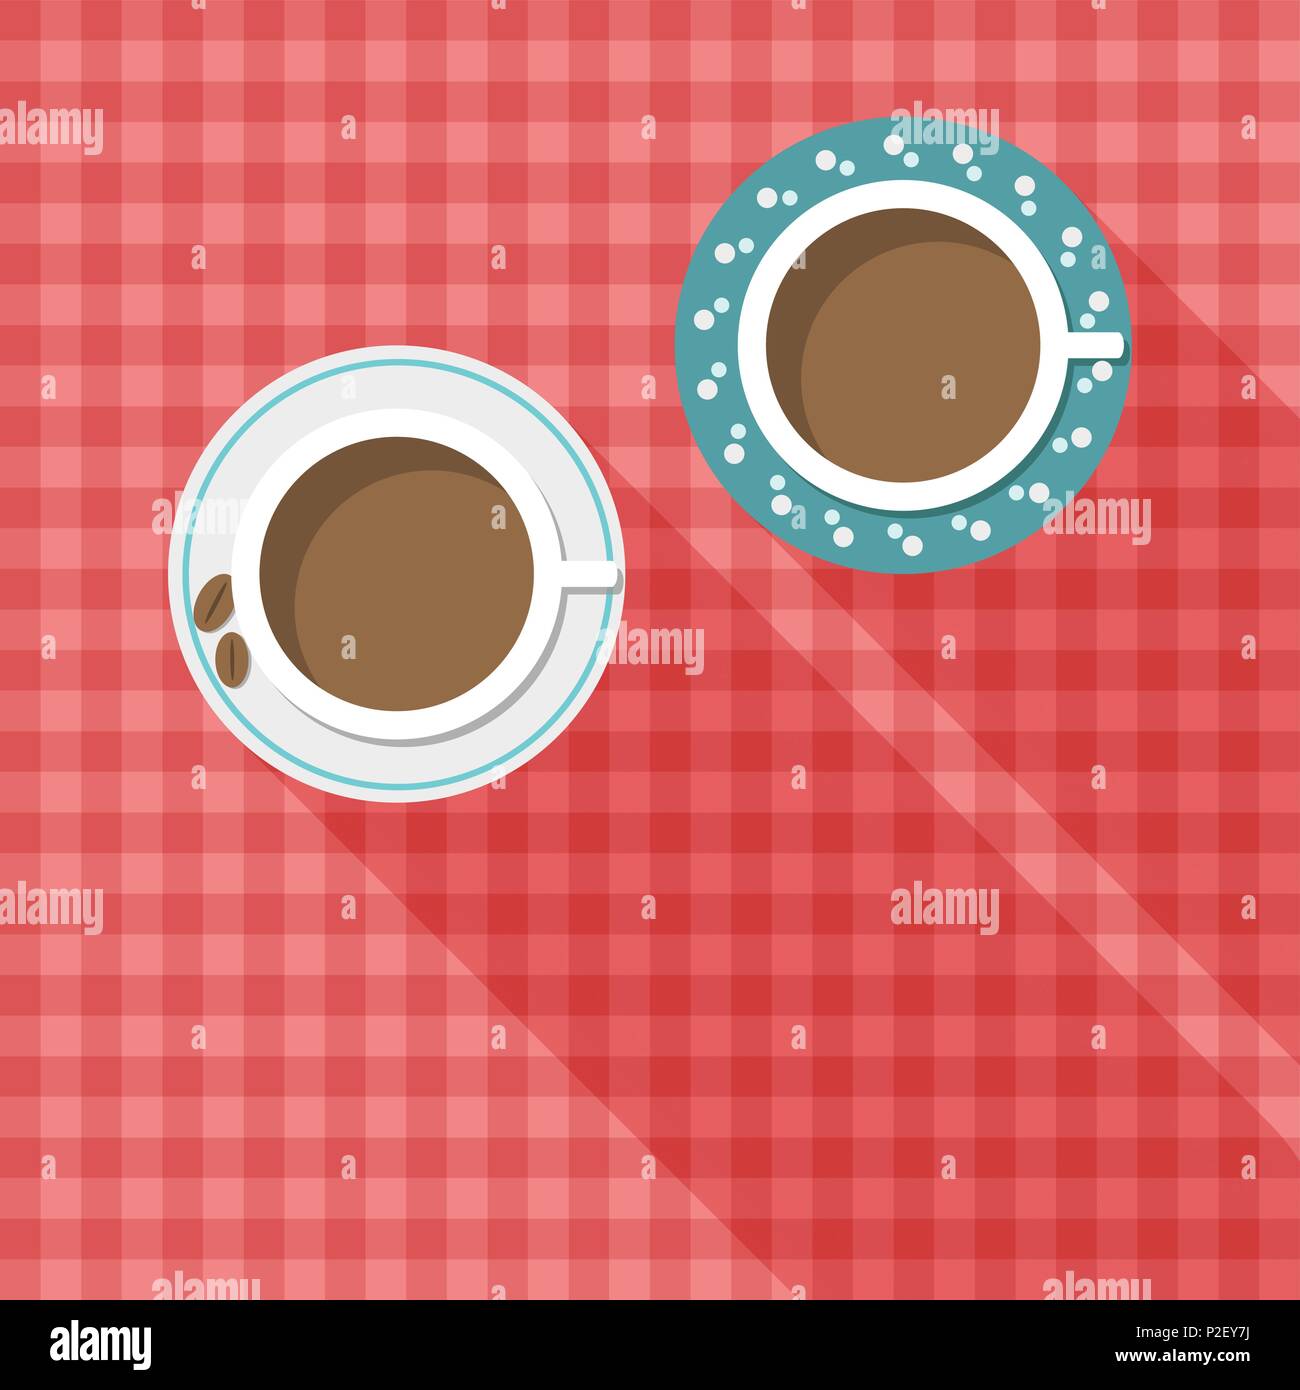 Abstract Card With Coffee Cups. Positive And Fun Start Of The Day Concept Stock Vector